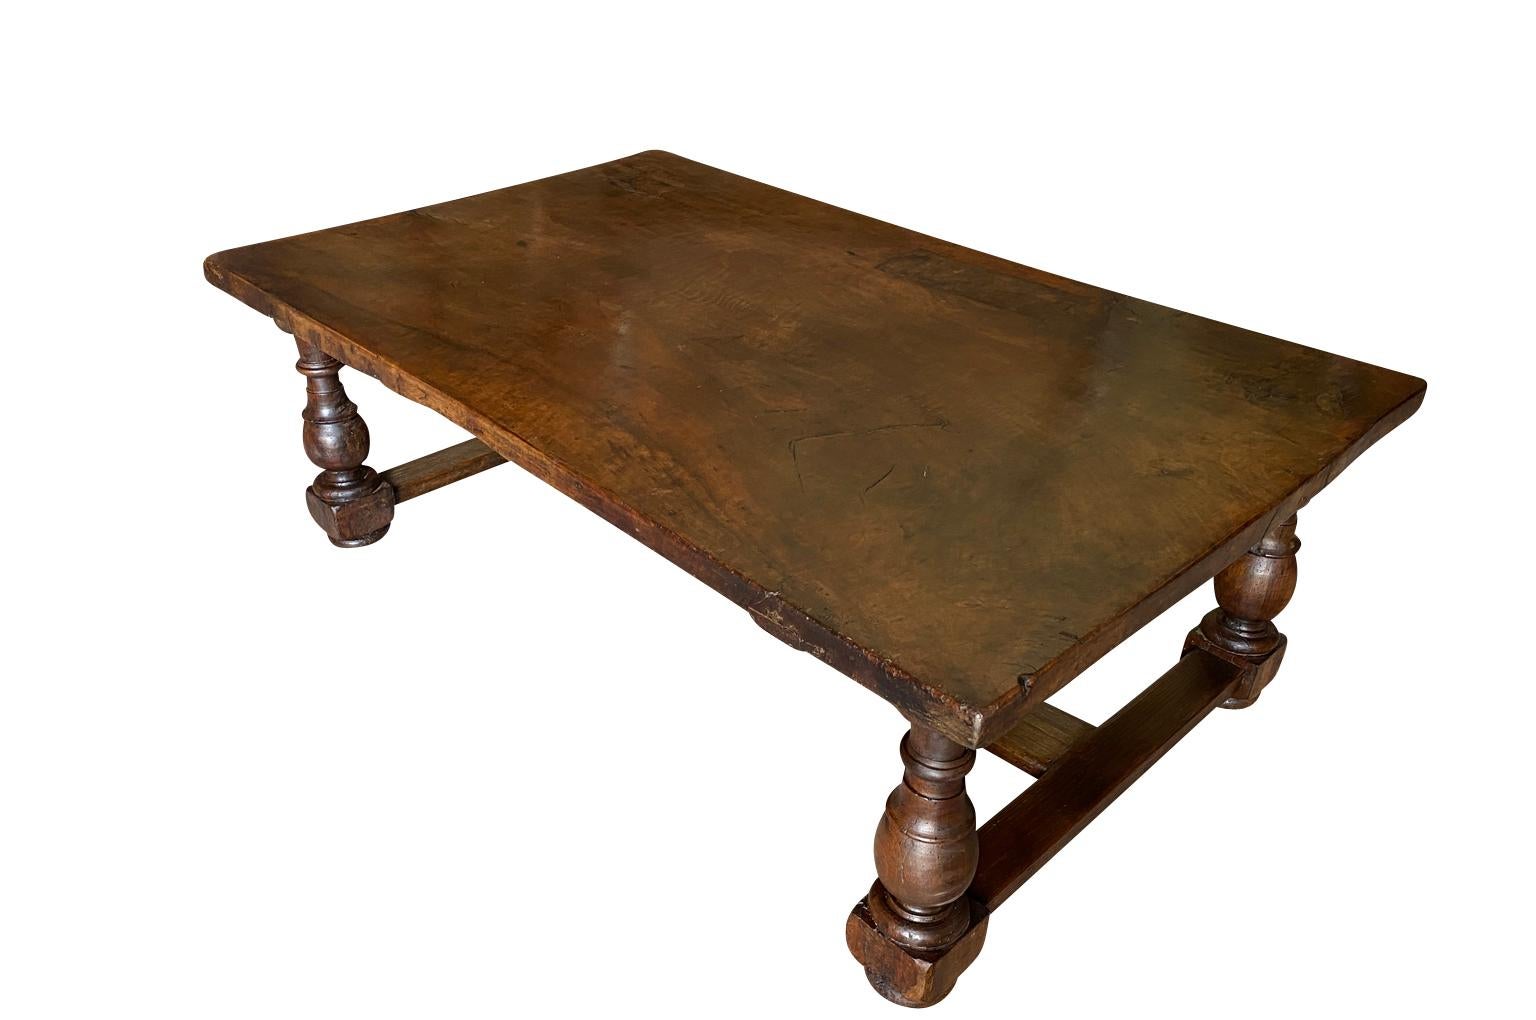 A very handsome mid-19th century Table Basse - Coffee Table from the Bologna region of Italy.  Soundly constructed from walnut and chestnut with a solid board top and nicely turned legs.  Beautiful patina - warm and luminous. 